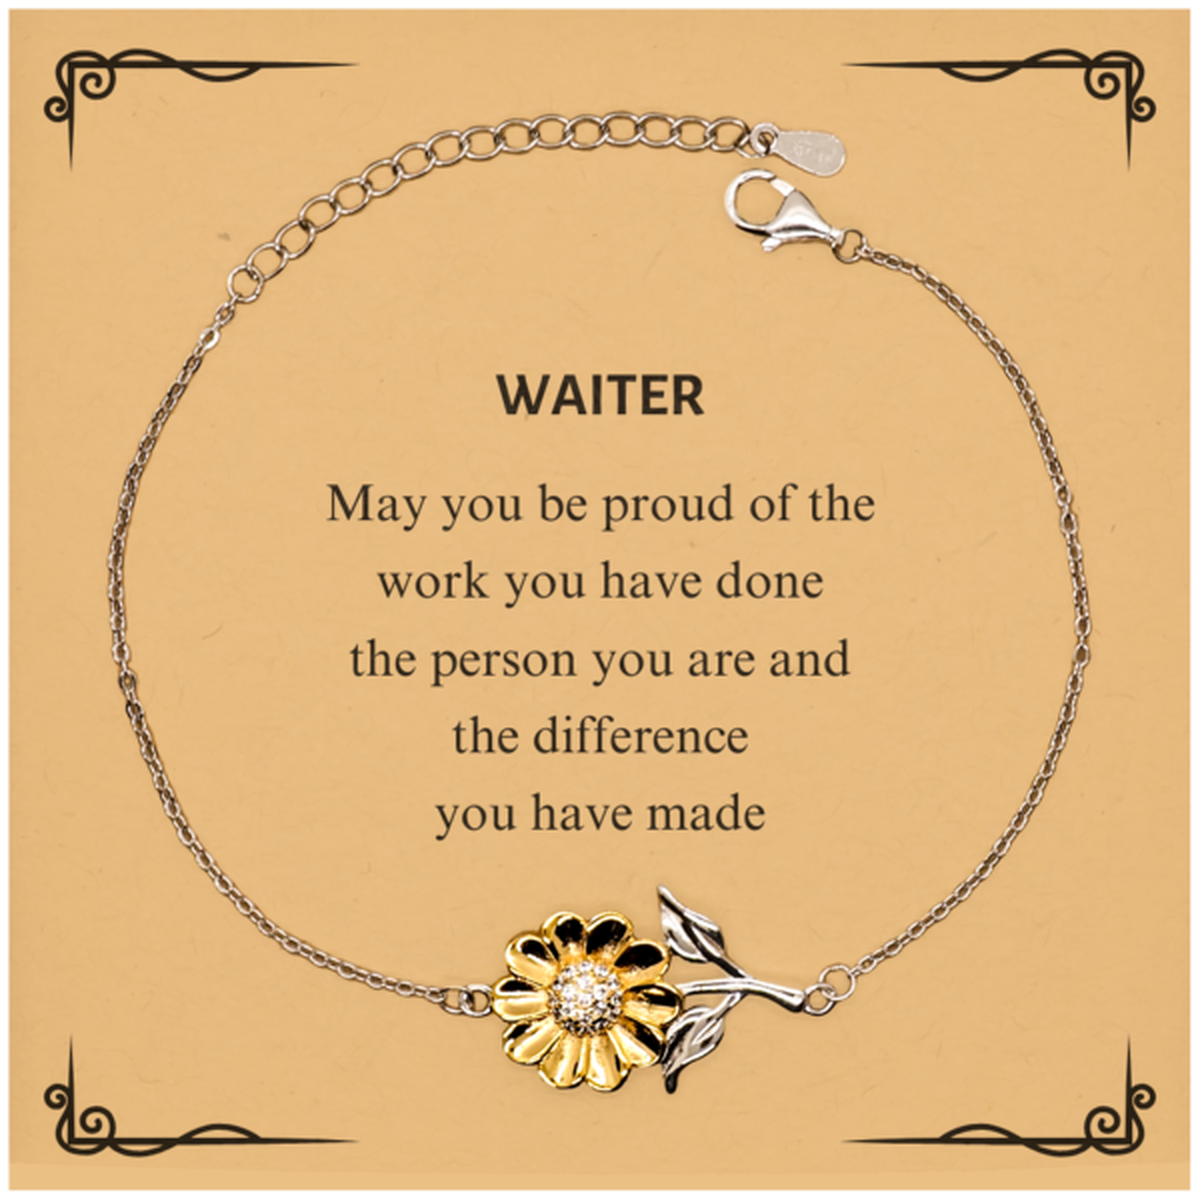 Waiter May you be proud of the work you have done, Retirement Waiter Sunflower Bracelet for Colleague Appreciation Gifts Amazing for Waiter